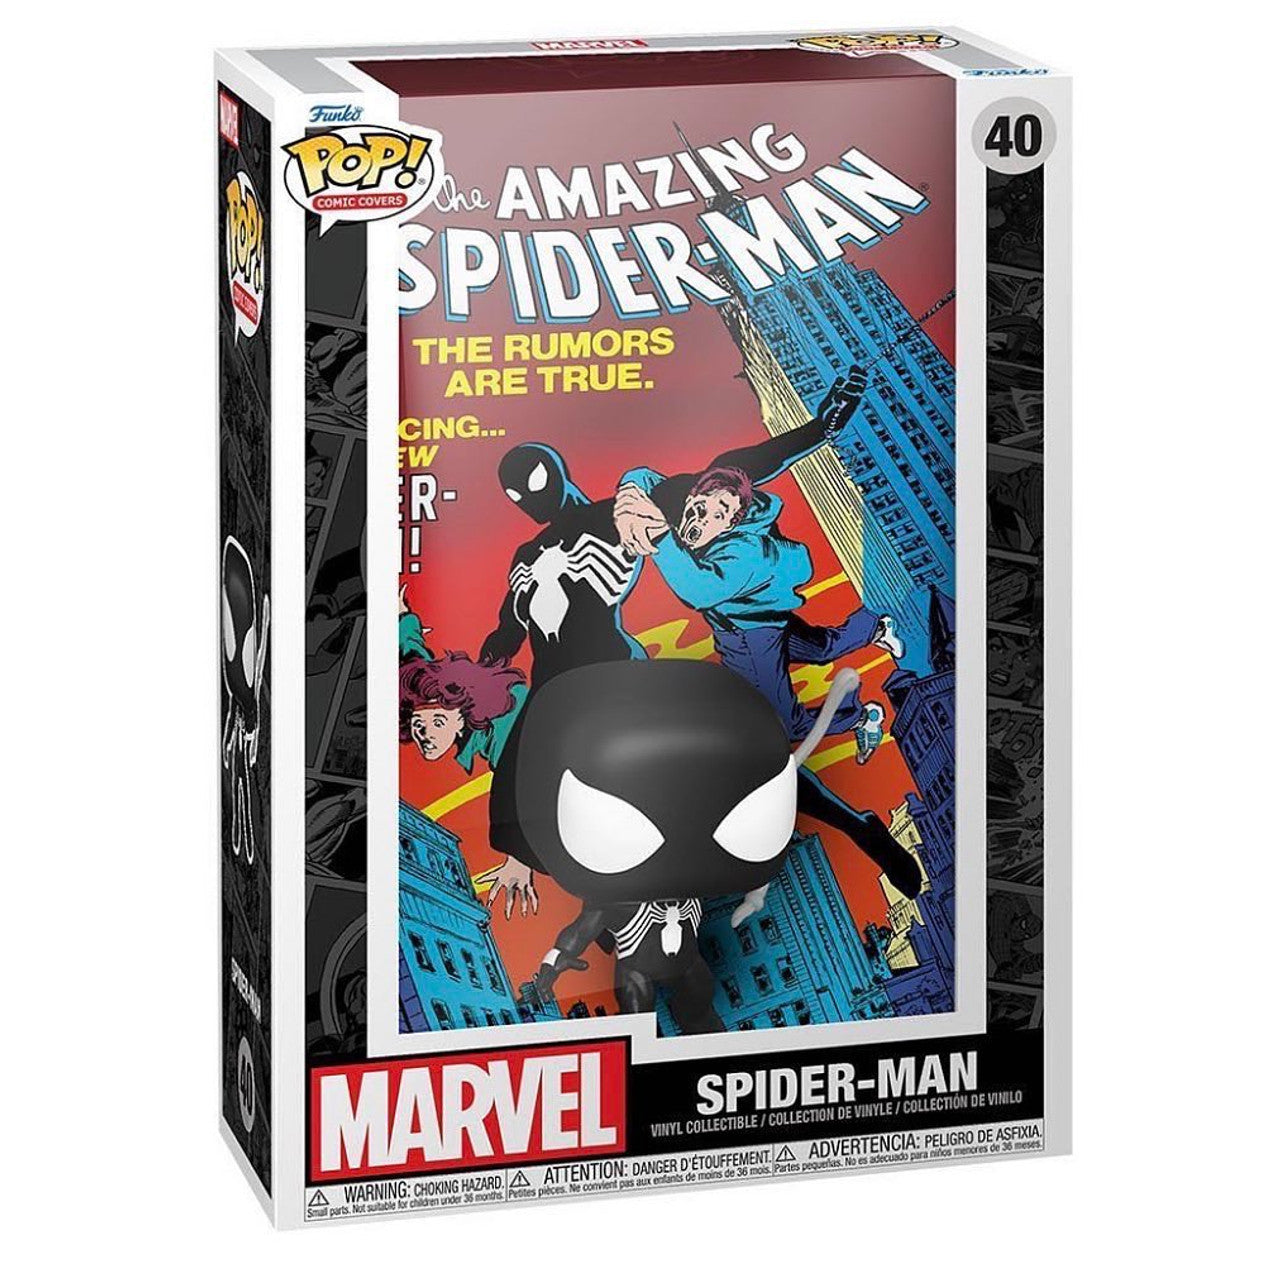 Pop! Comic Cover The Amazing Spider-Man